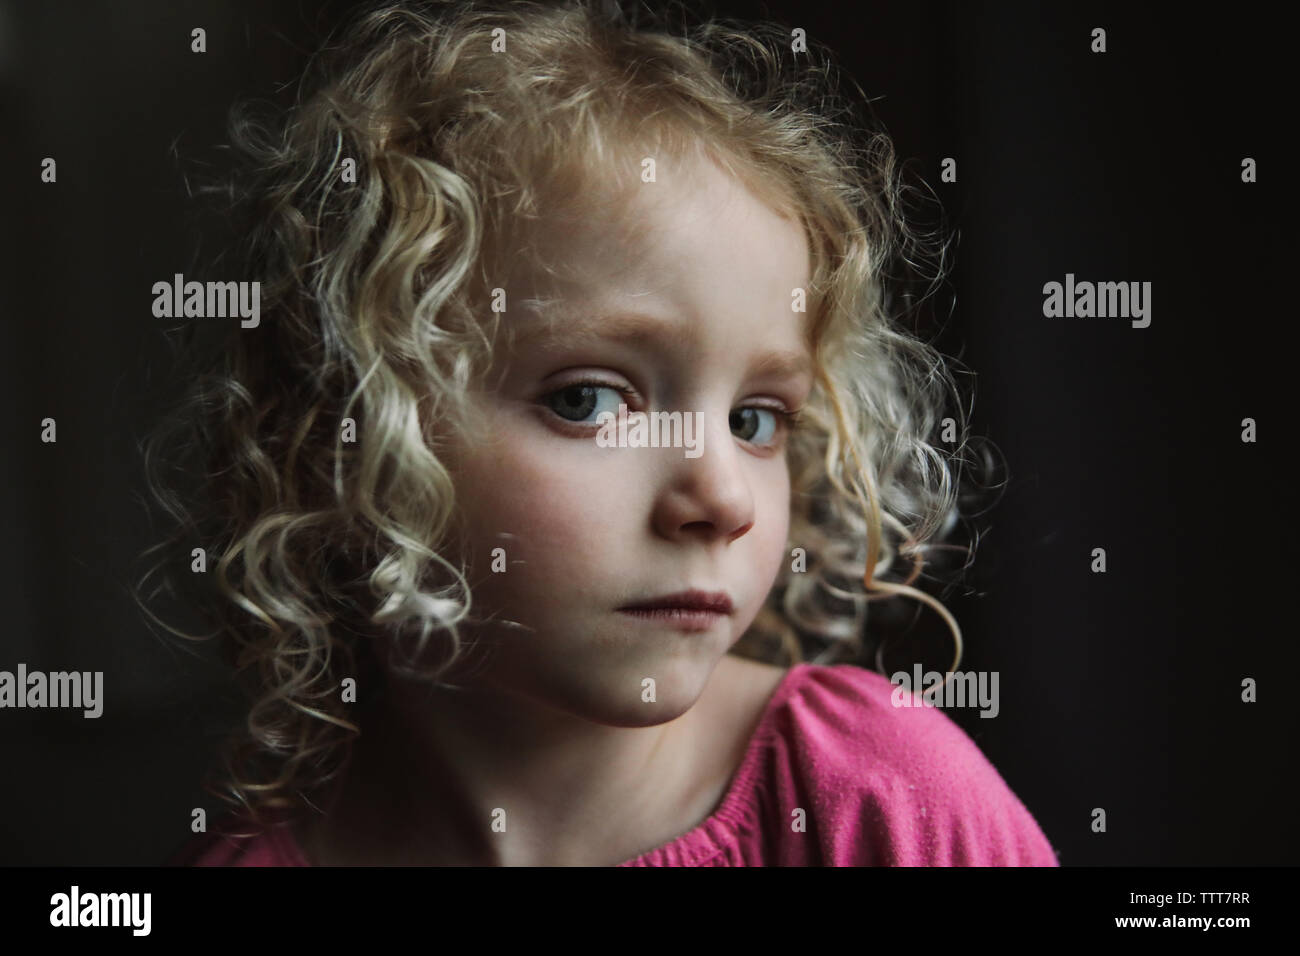 Close-up portrait of girl against black background Stock Photo